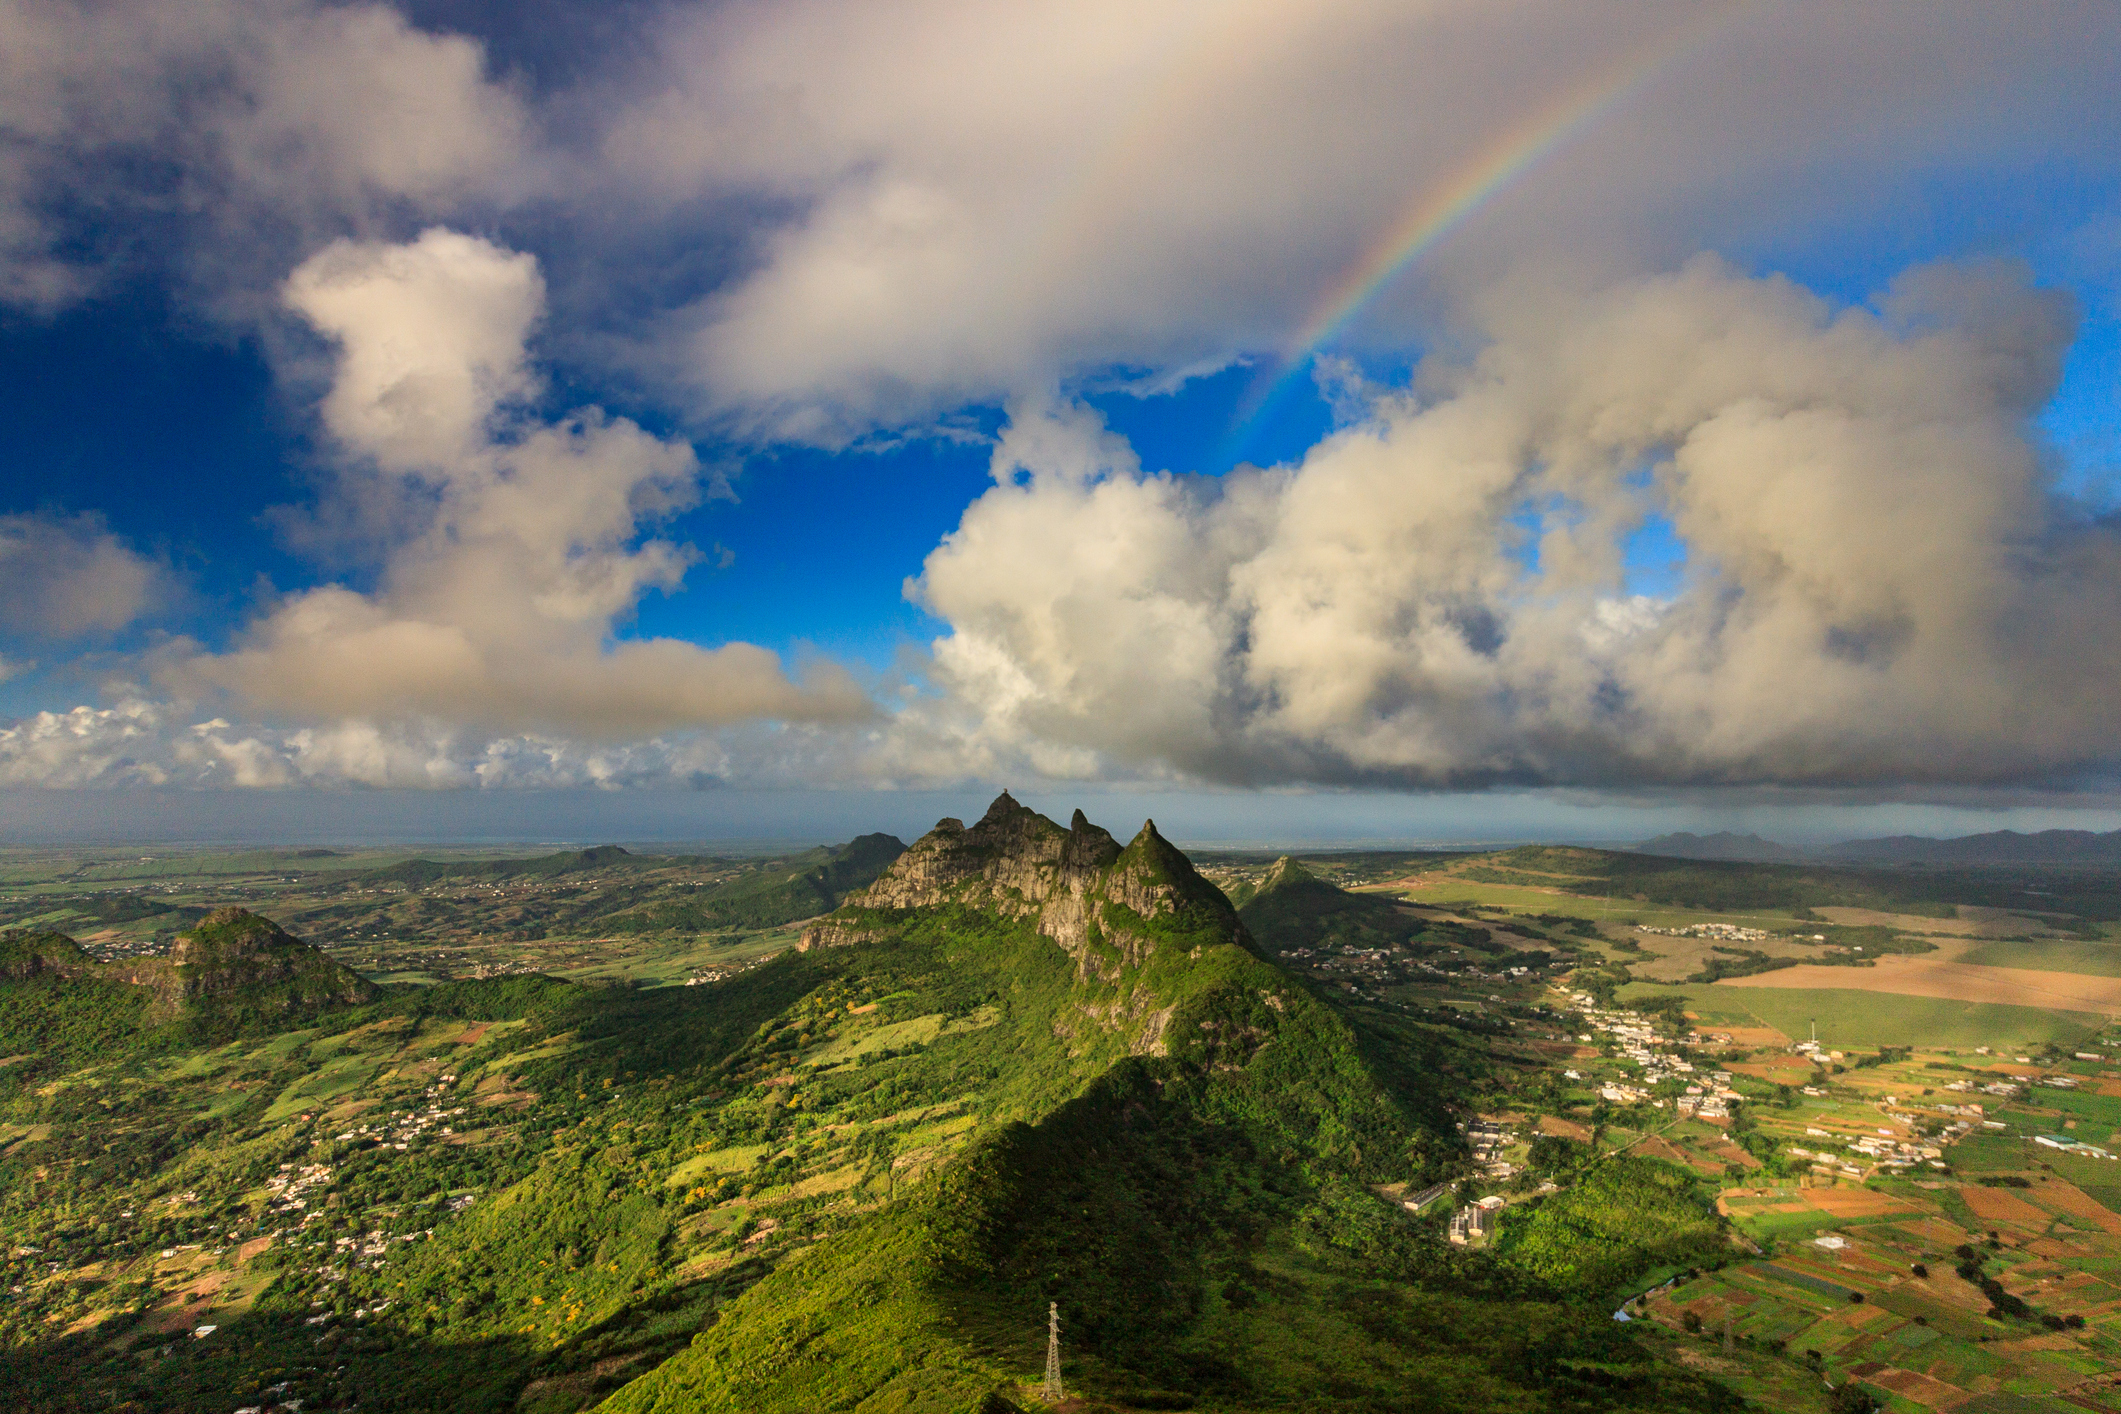 Rainbow as seen from Le Pouce, Mauritius